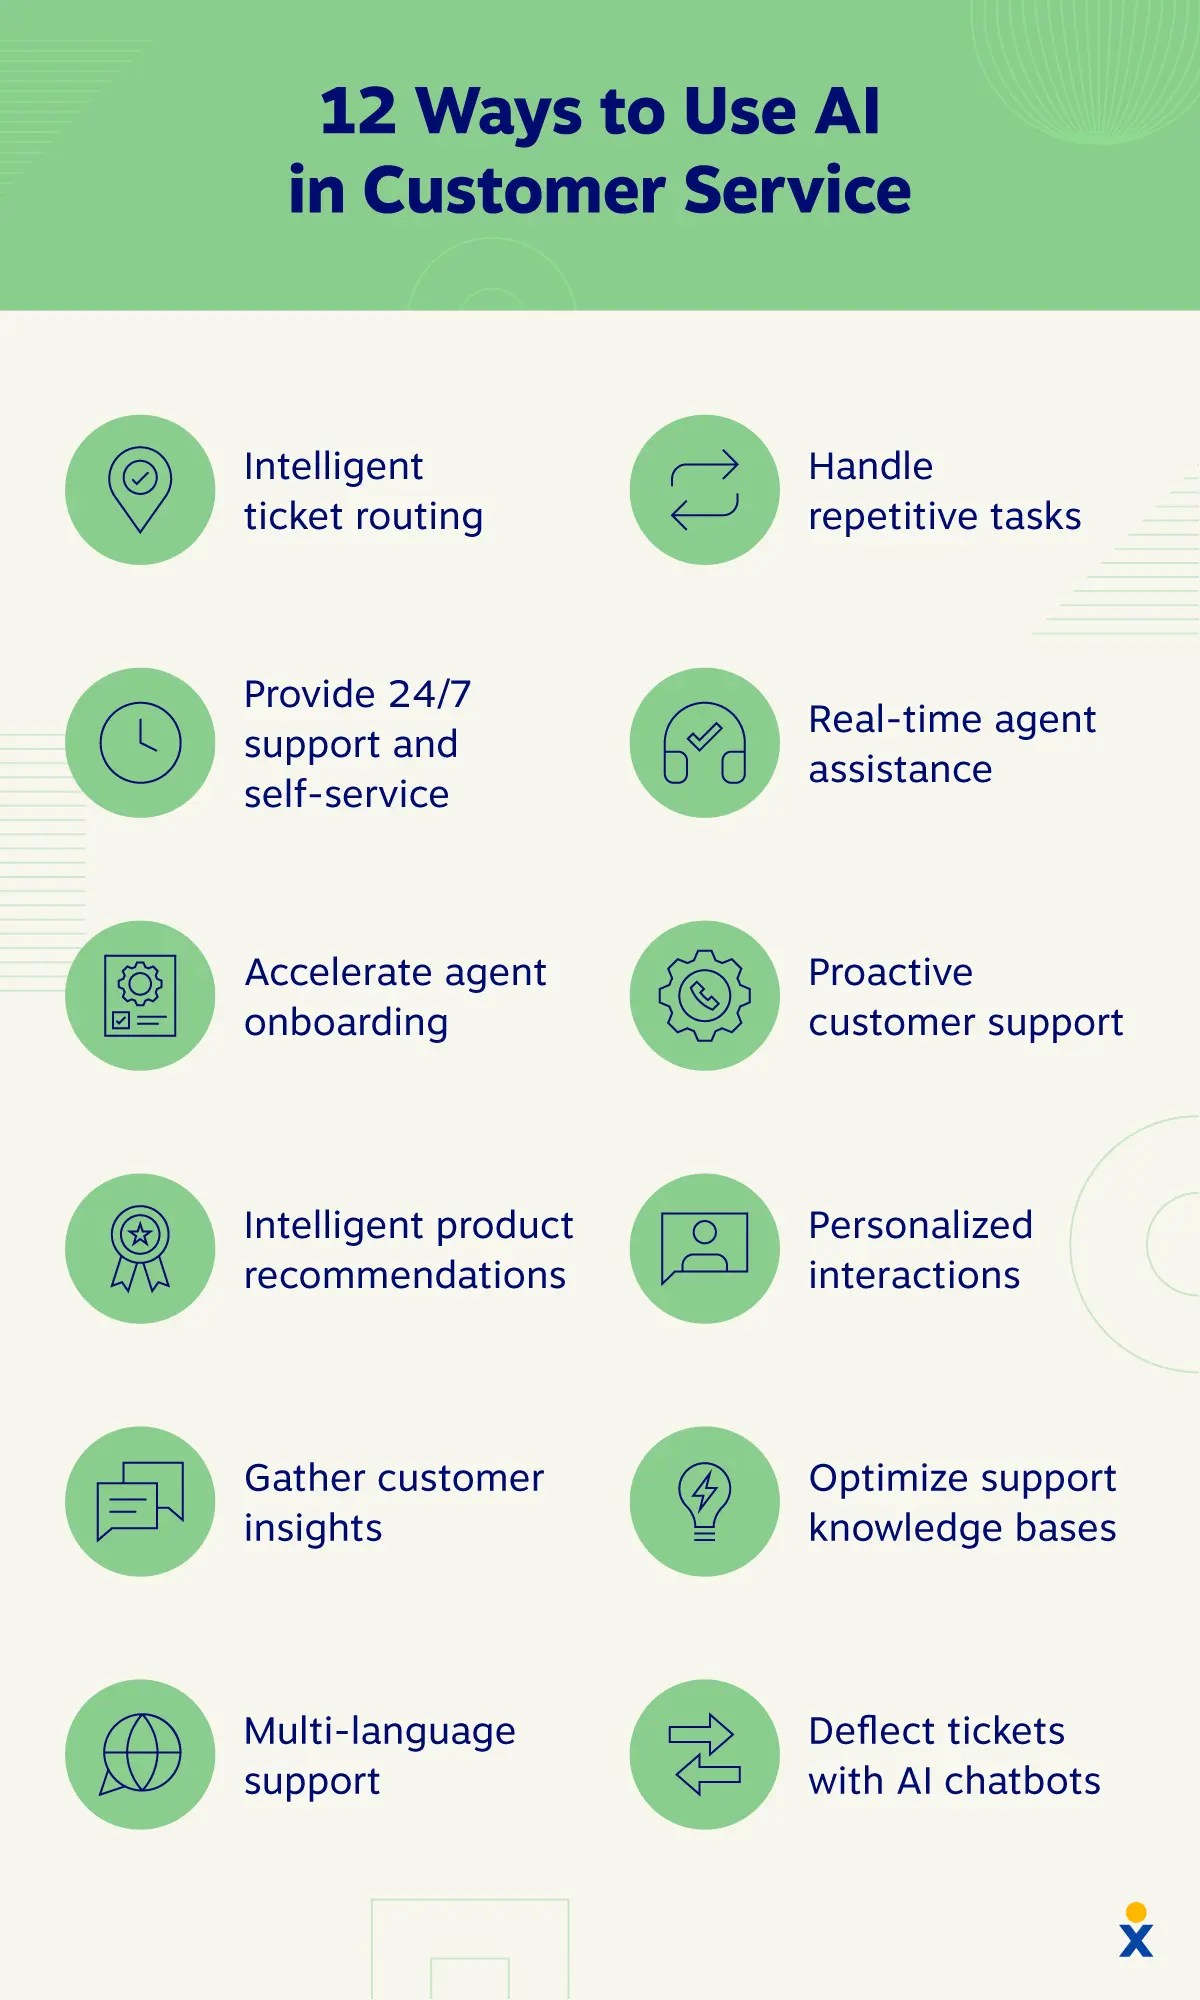 Icons list keys ways to use AI in customer service.